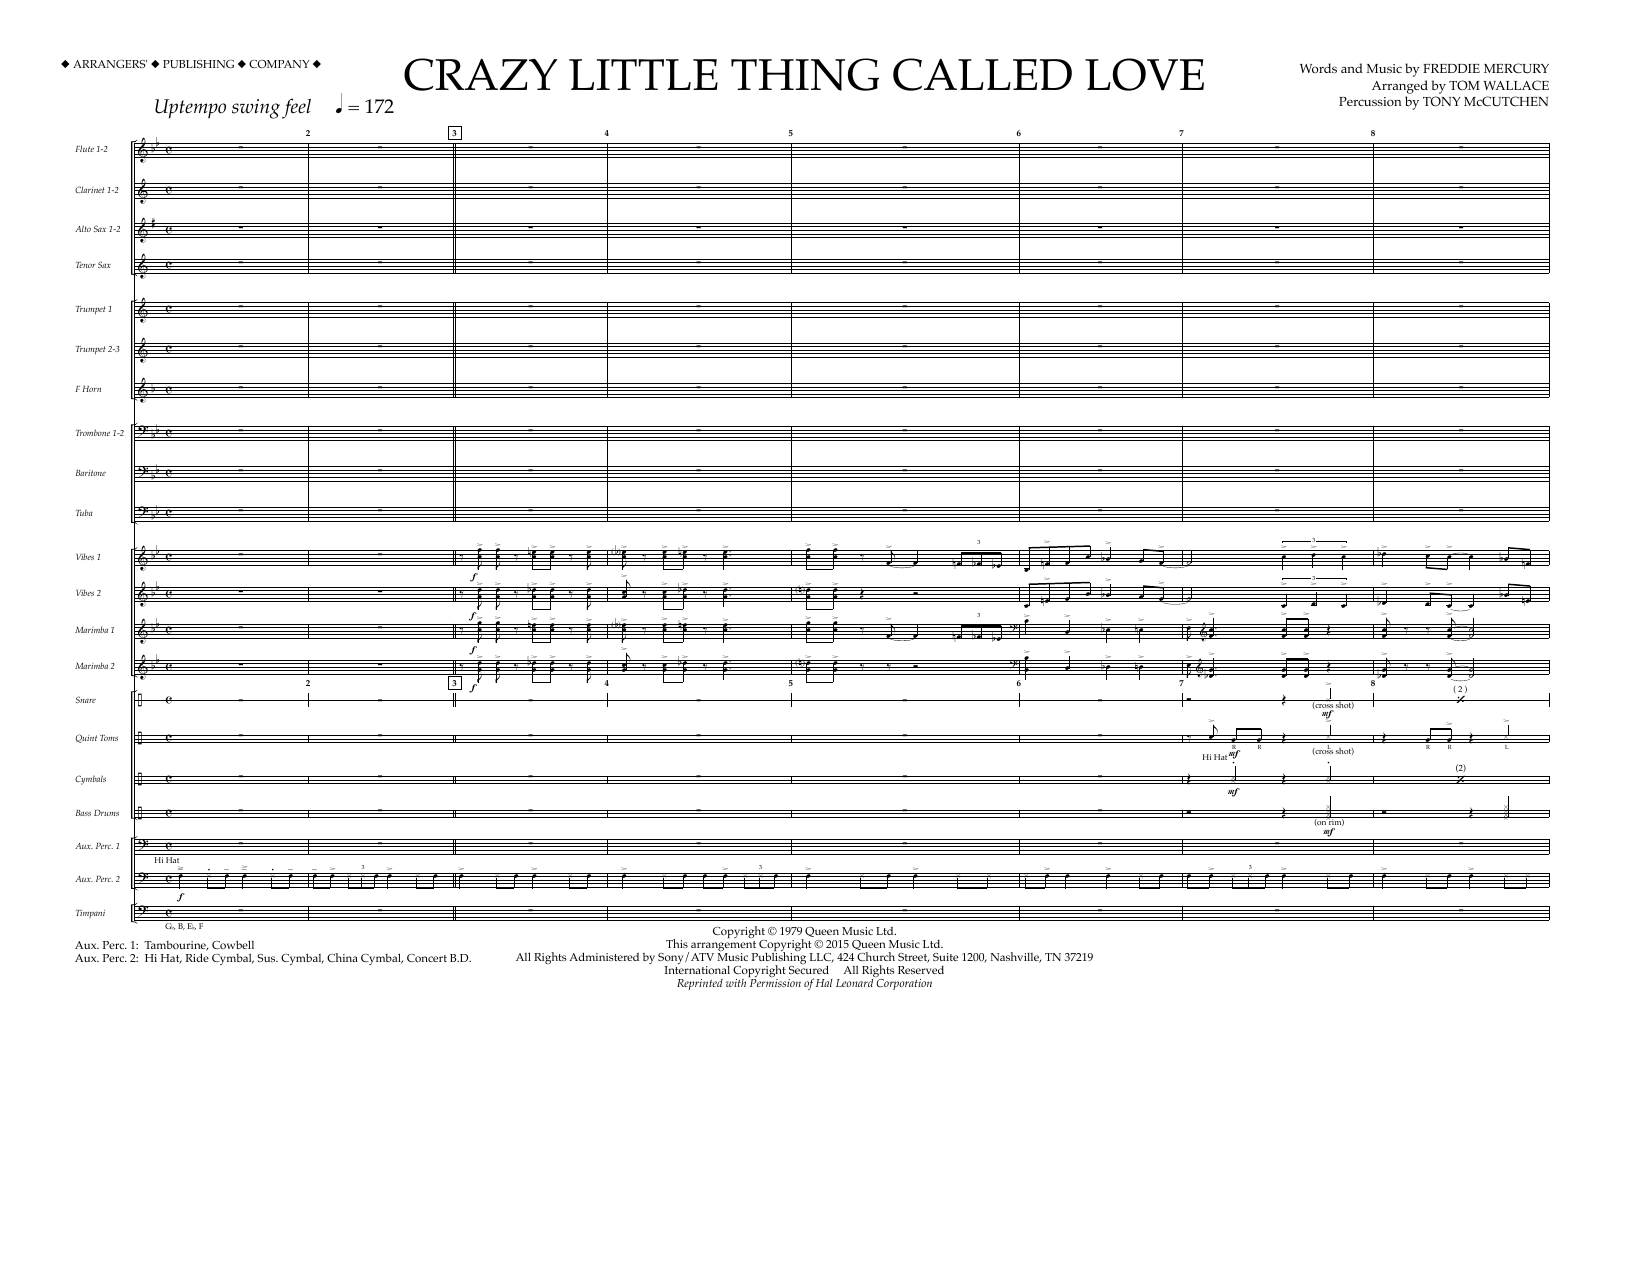 Download Tom Wallace Crazy Little Thing Called Love - Full S Sheet Music